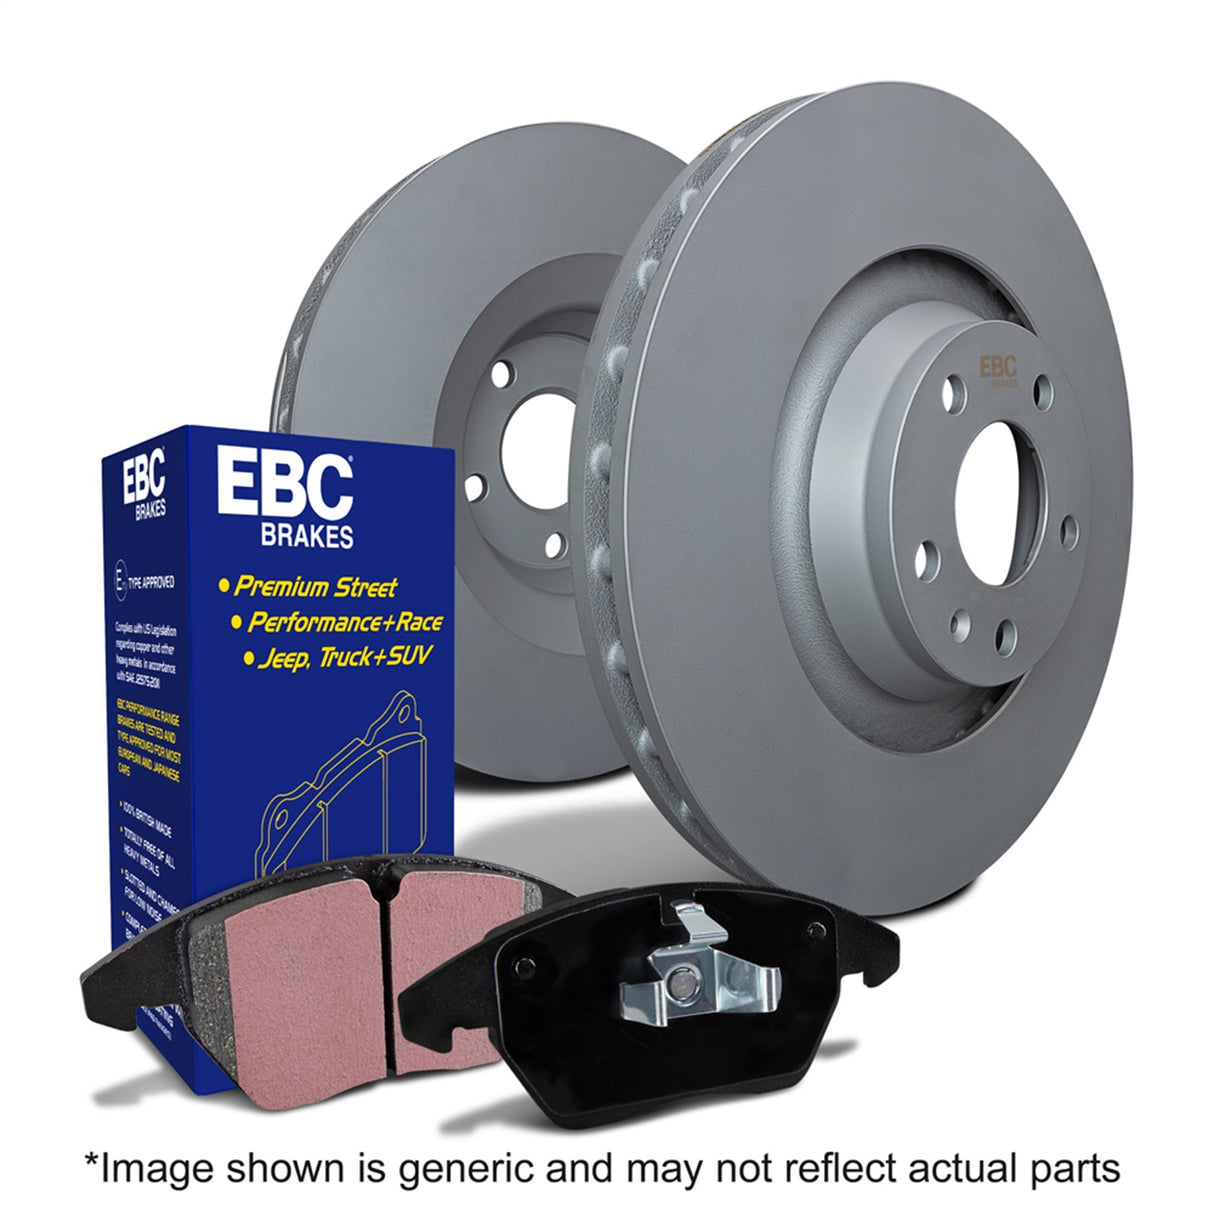 EBC Brakes S20K1304 S20 Kits Ultimax and Plain Rotors - Roam Overland Outfitters